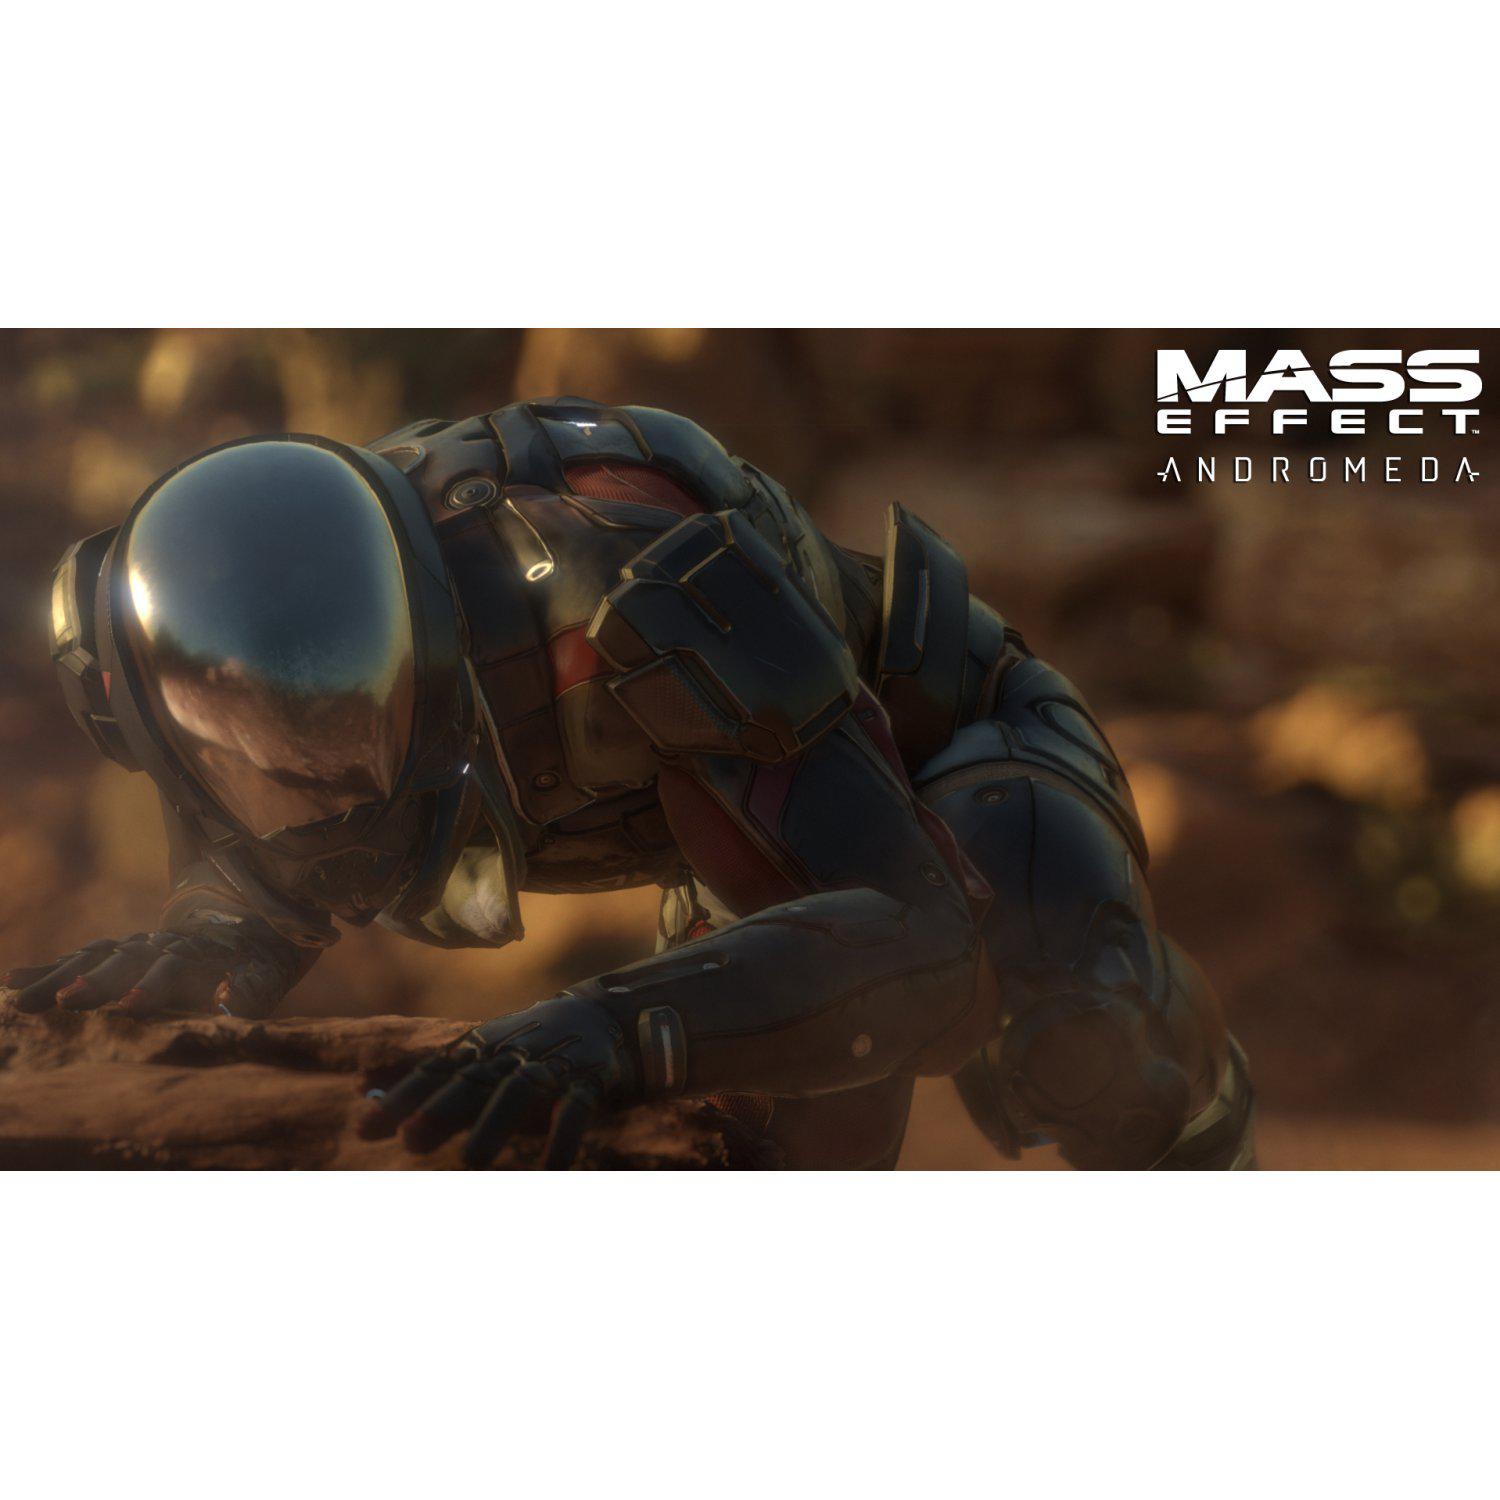 i paid for mass effect andromeda deluxe edition